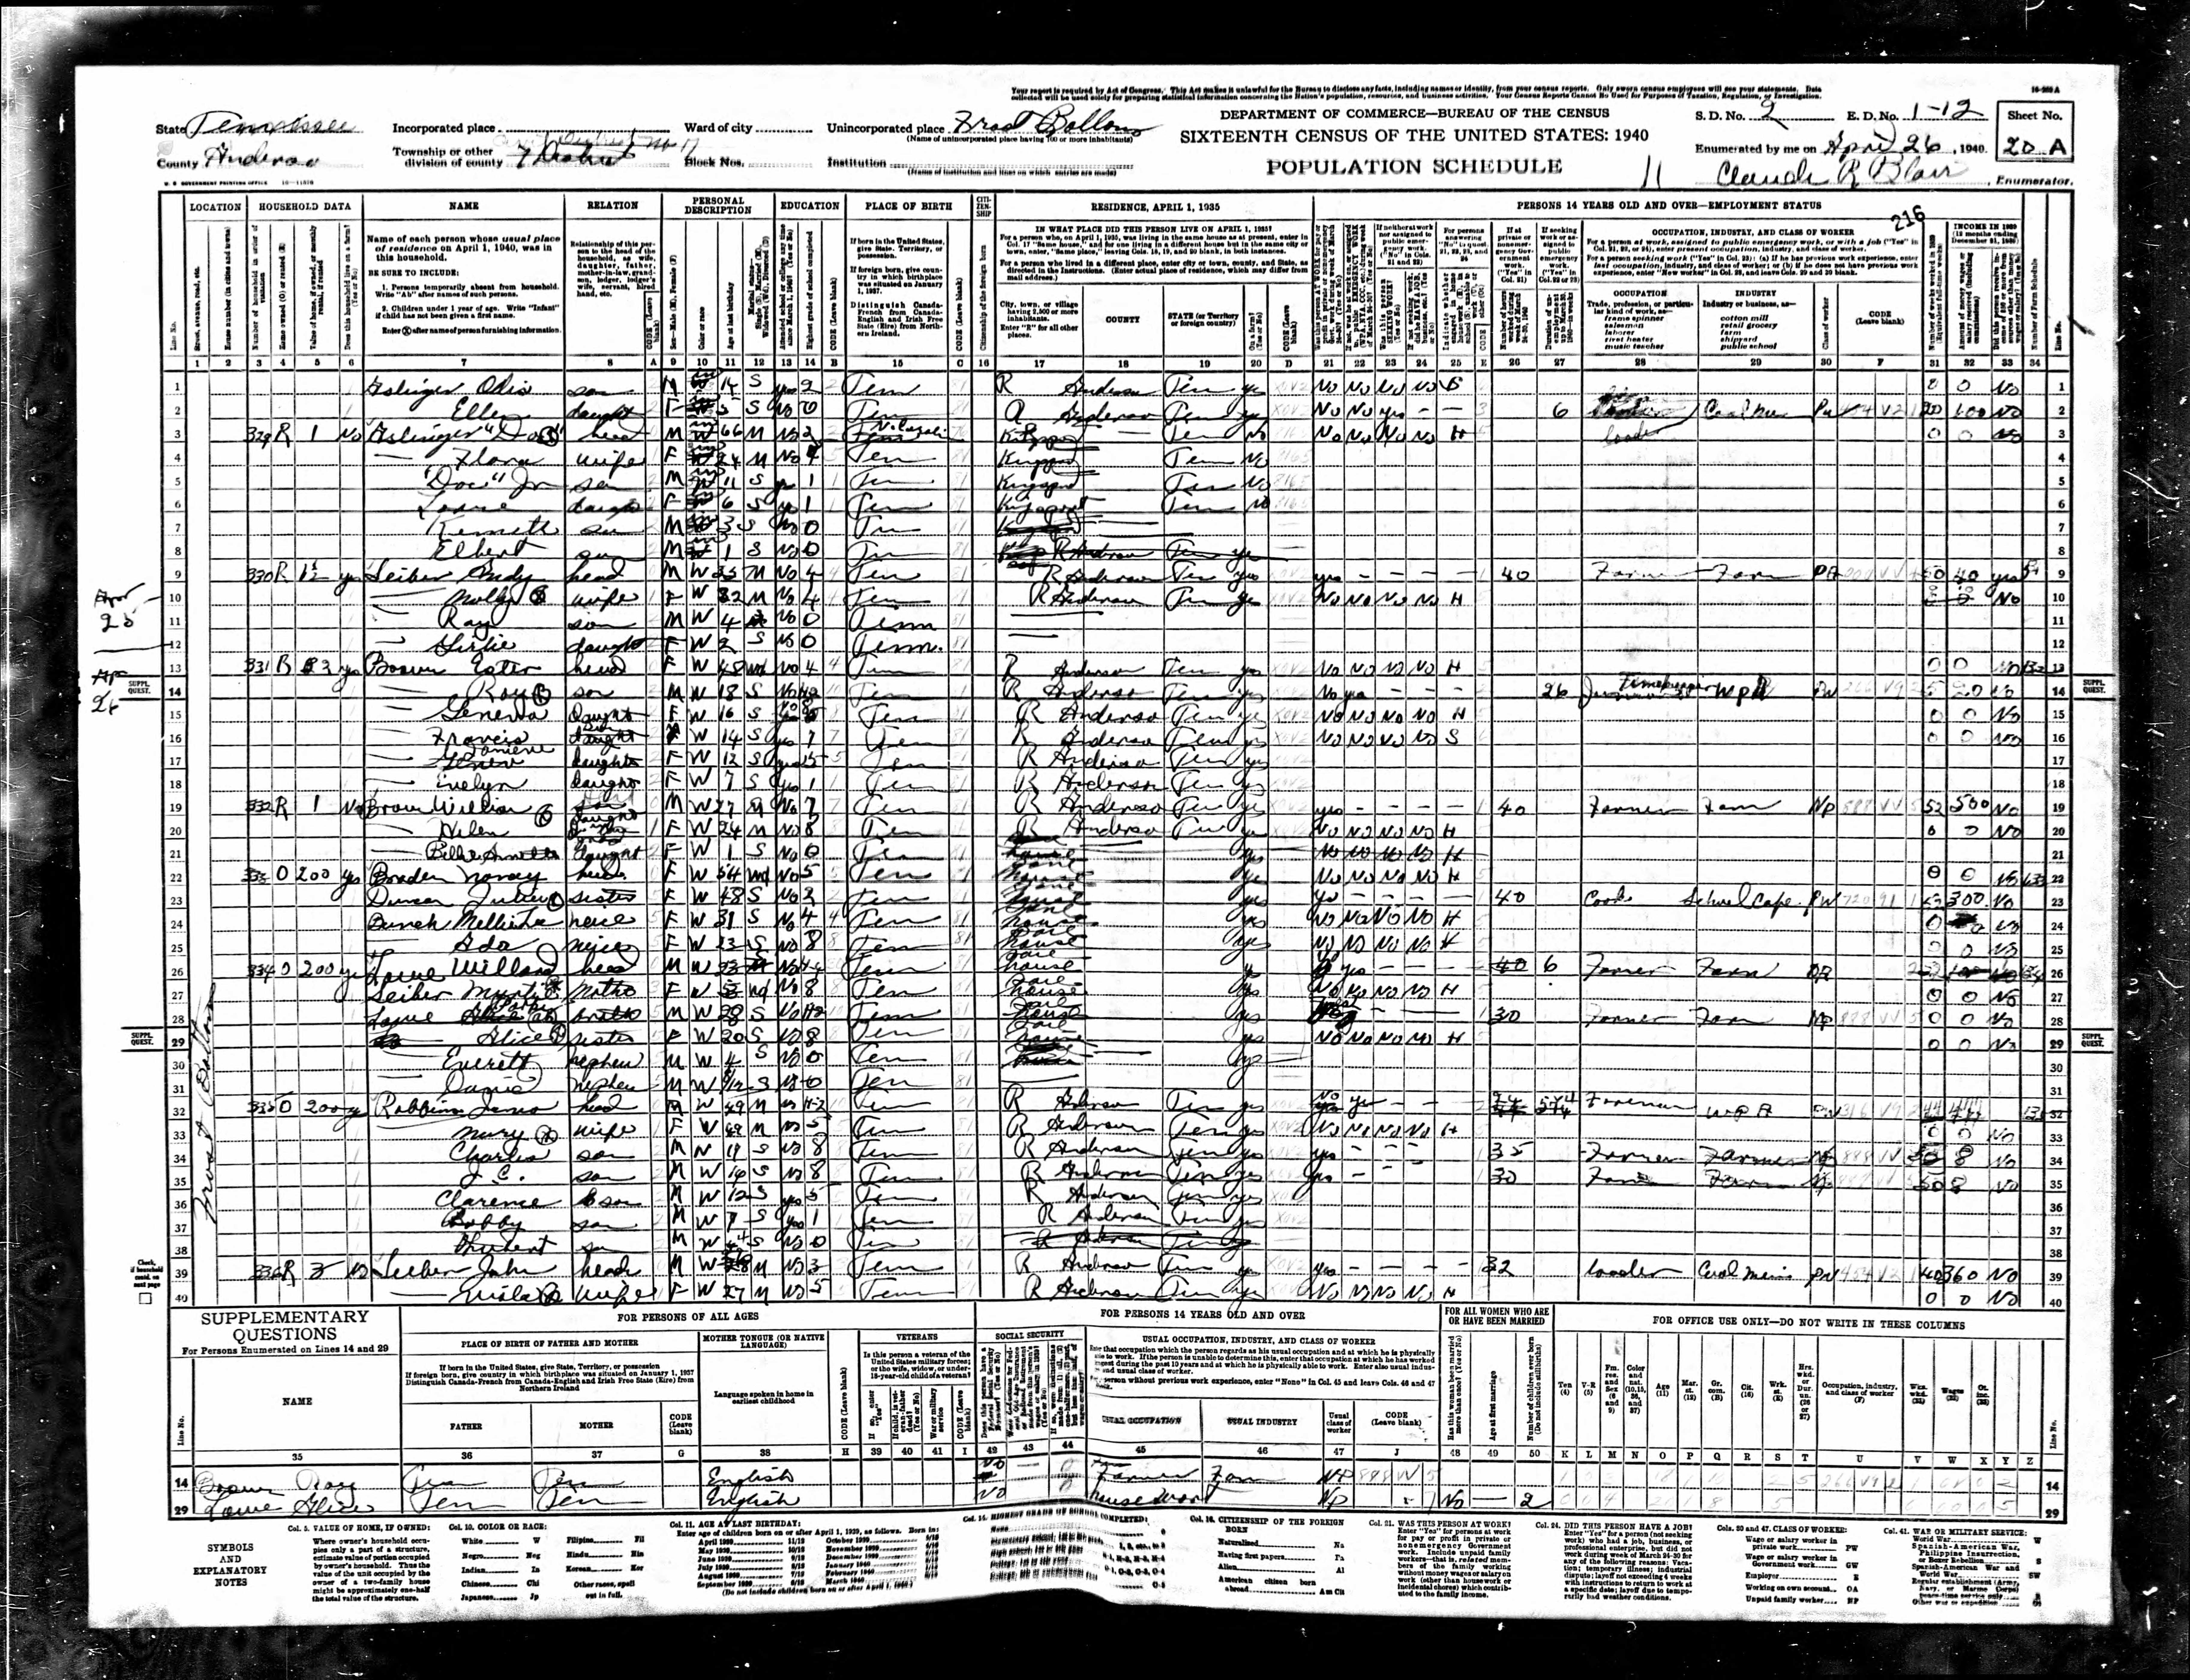 1940 U.S. Census, Anderson County, Tennessee, Dist. 7, page 216a